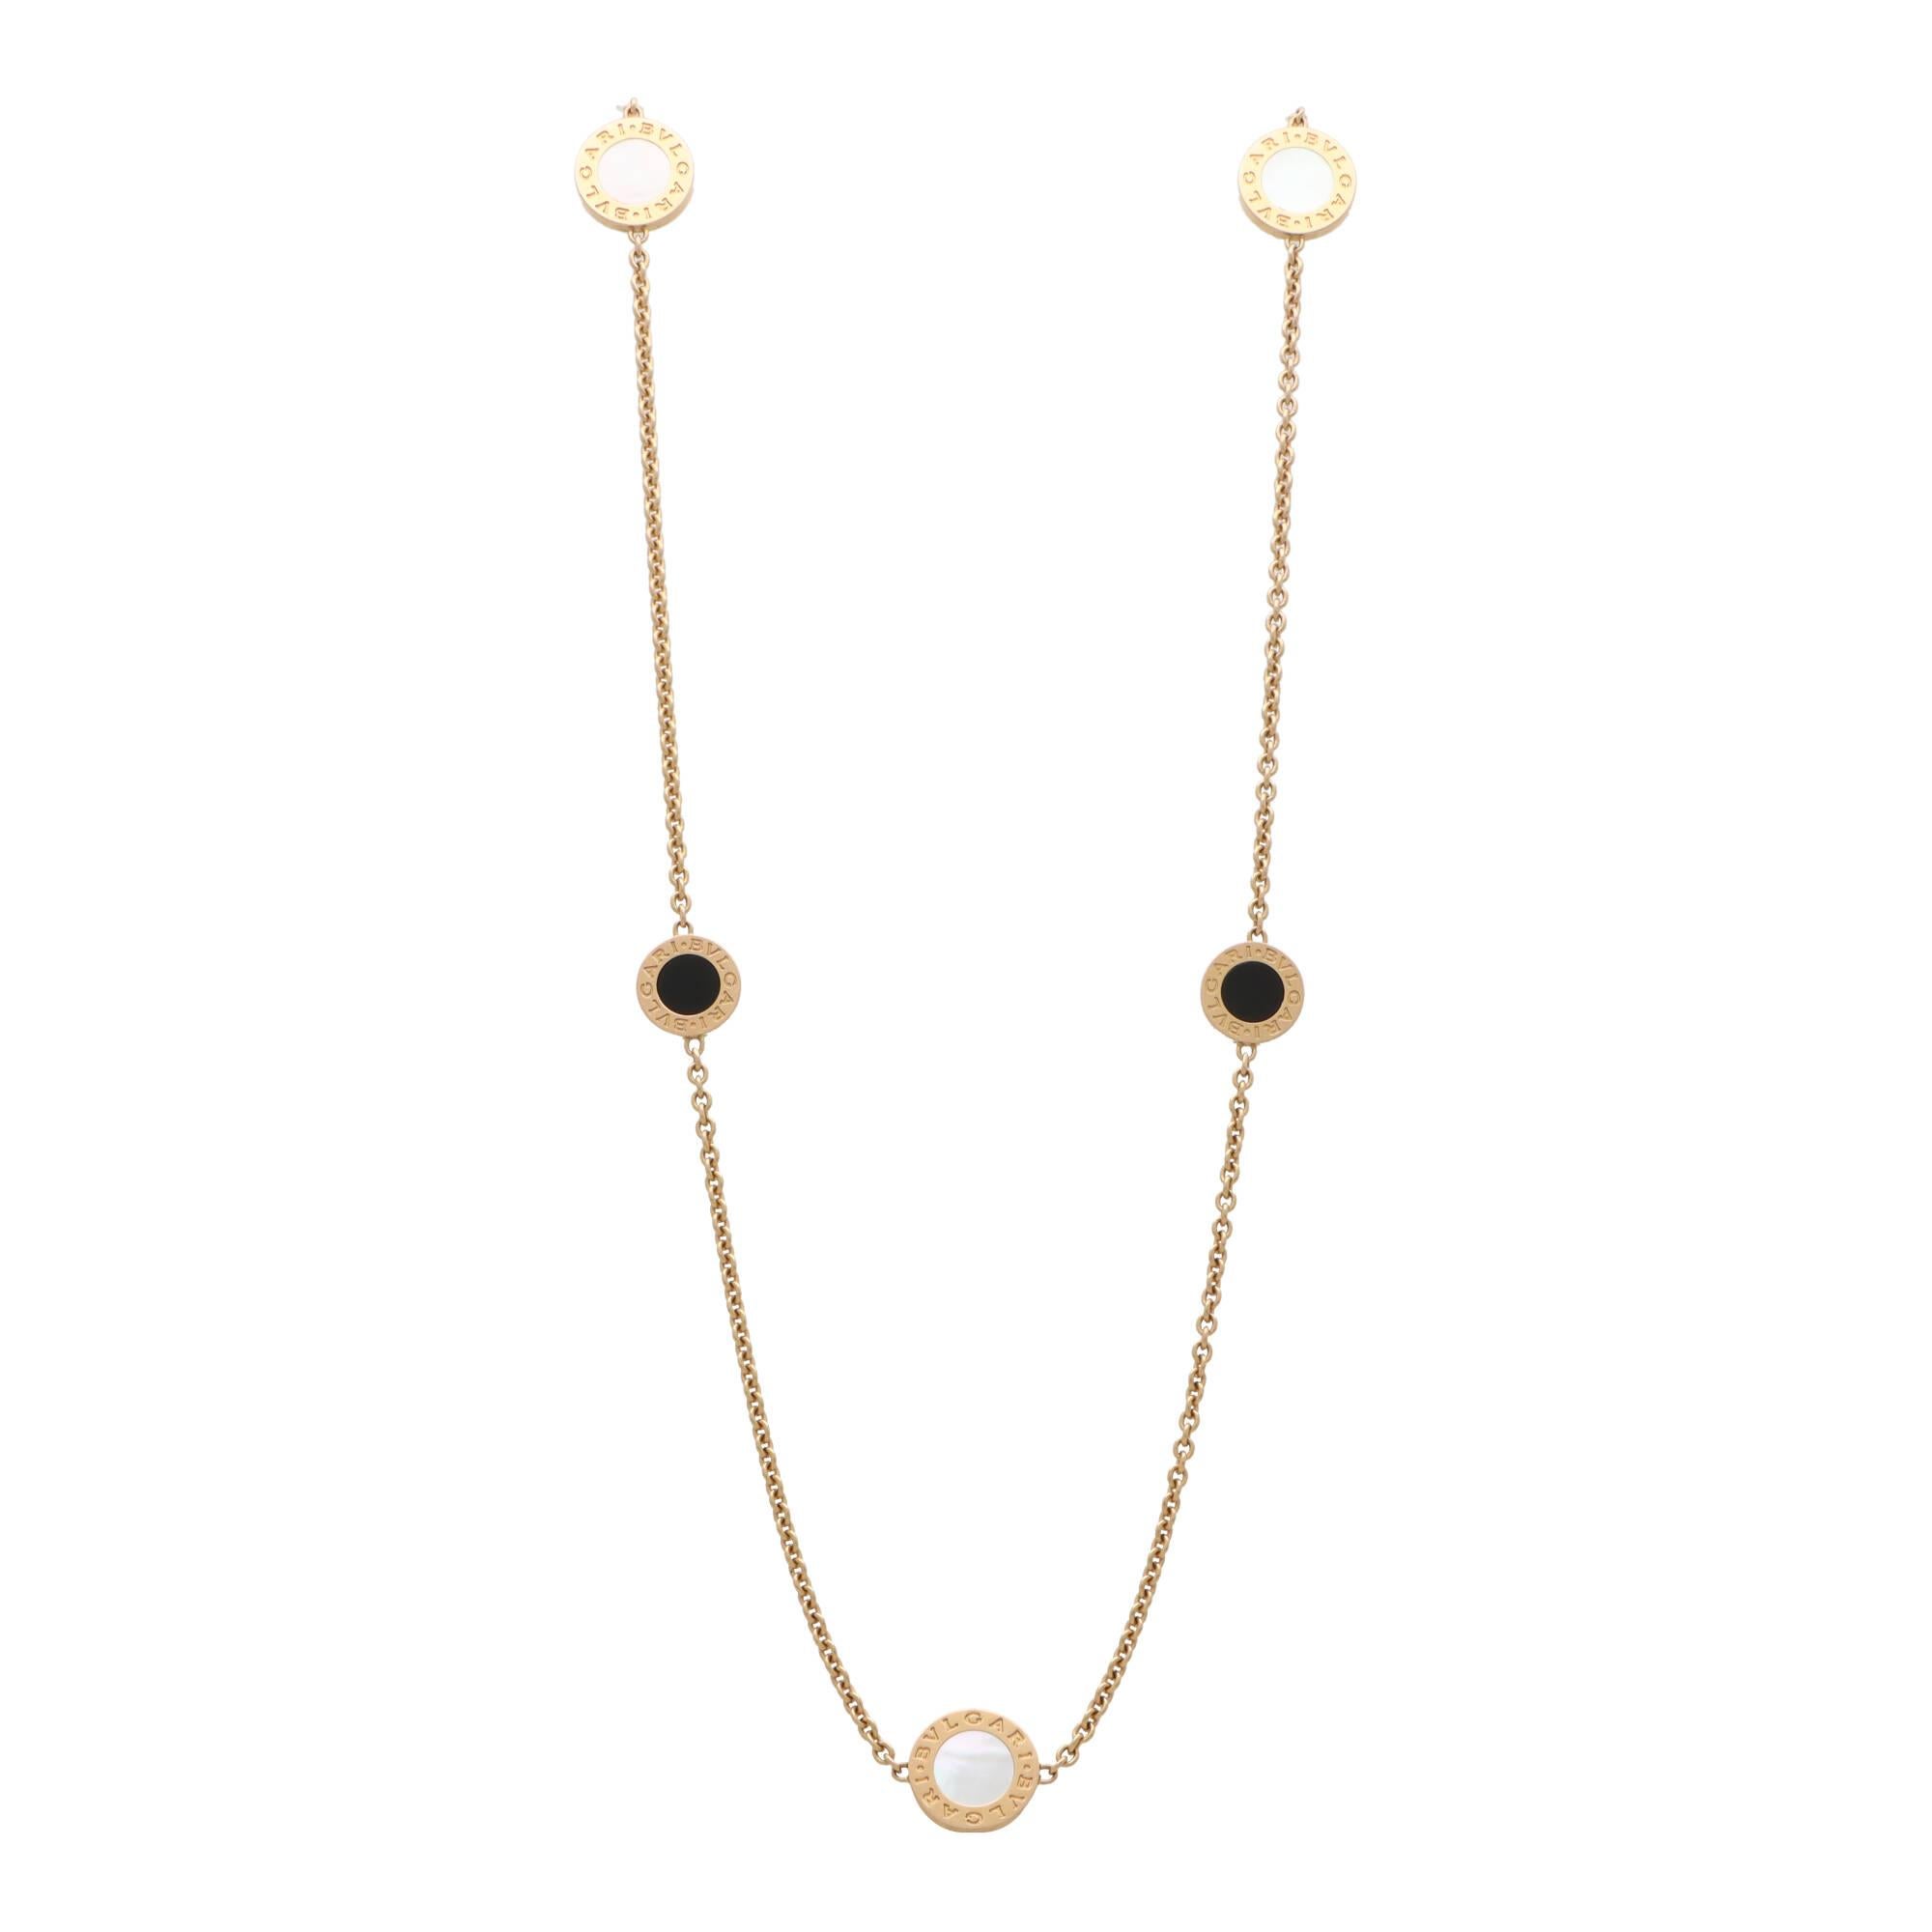 Modern Bvlgari Signature Mother of Pearl and Onyx Disc Necklace in 18k Rose Gold